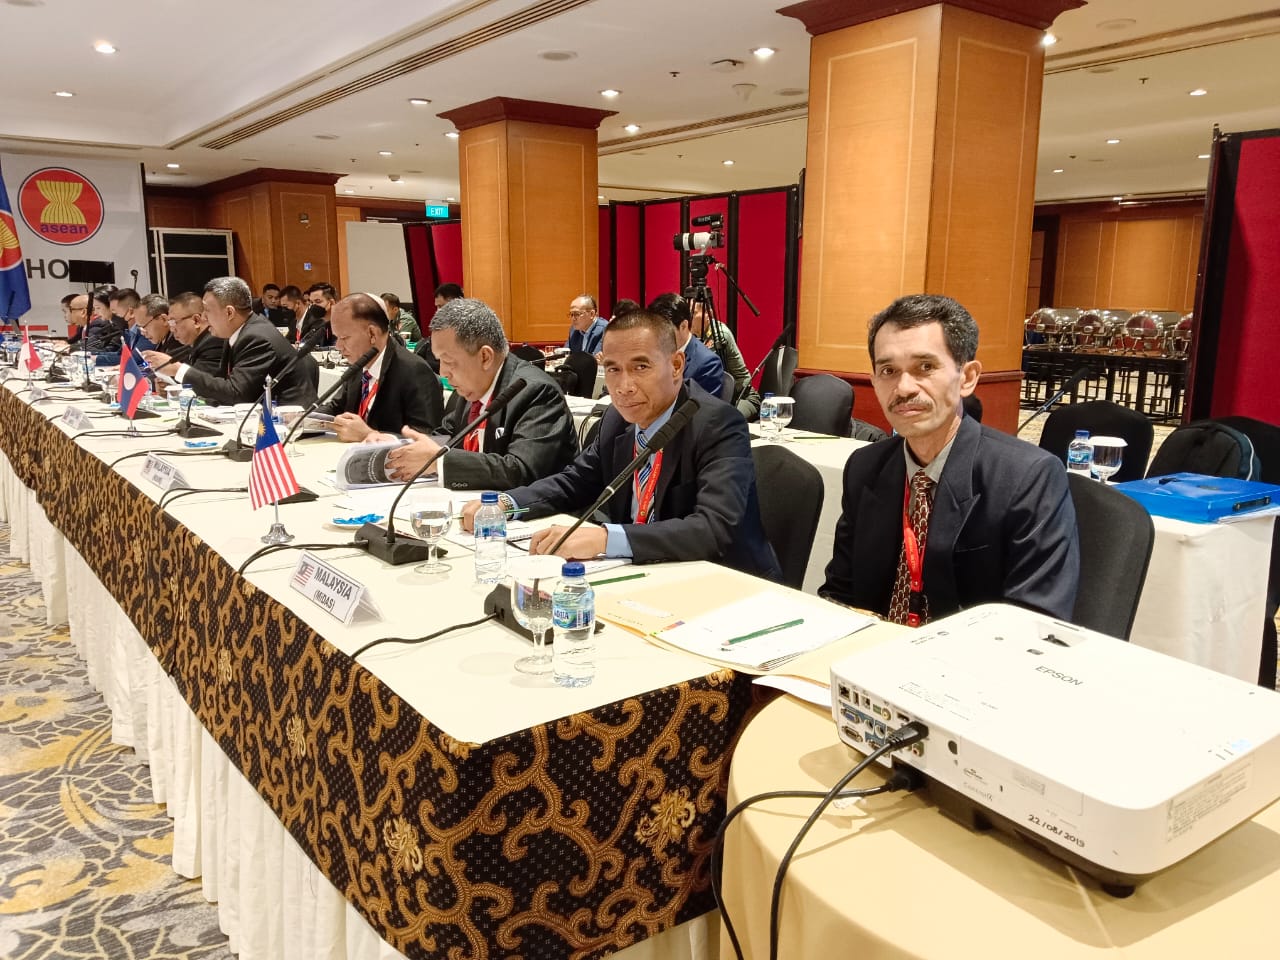 The Track II Network of ASEAN Defence and Security Institutions (NADI) 16th Annual Meeting